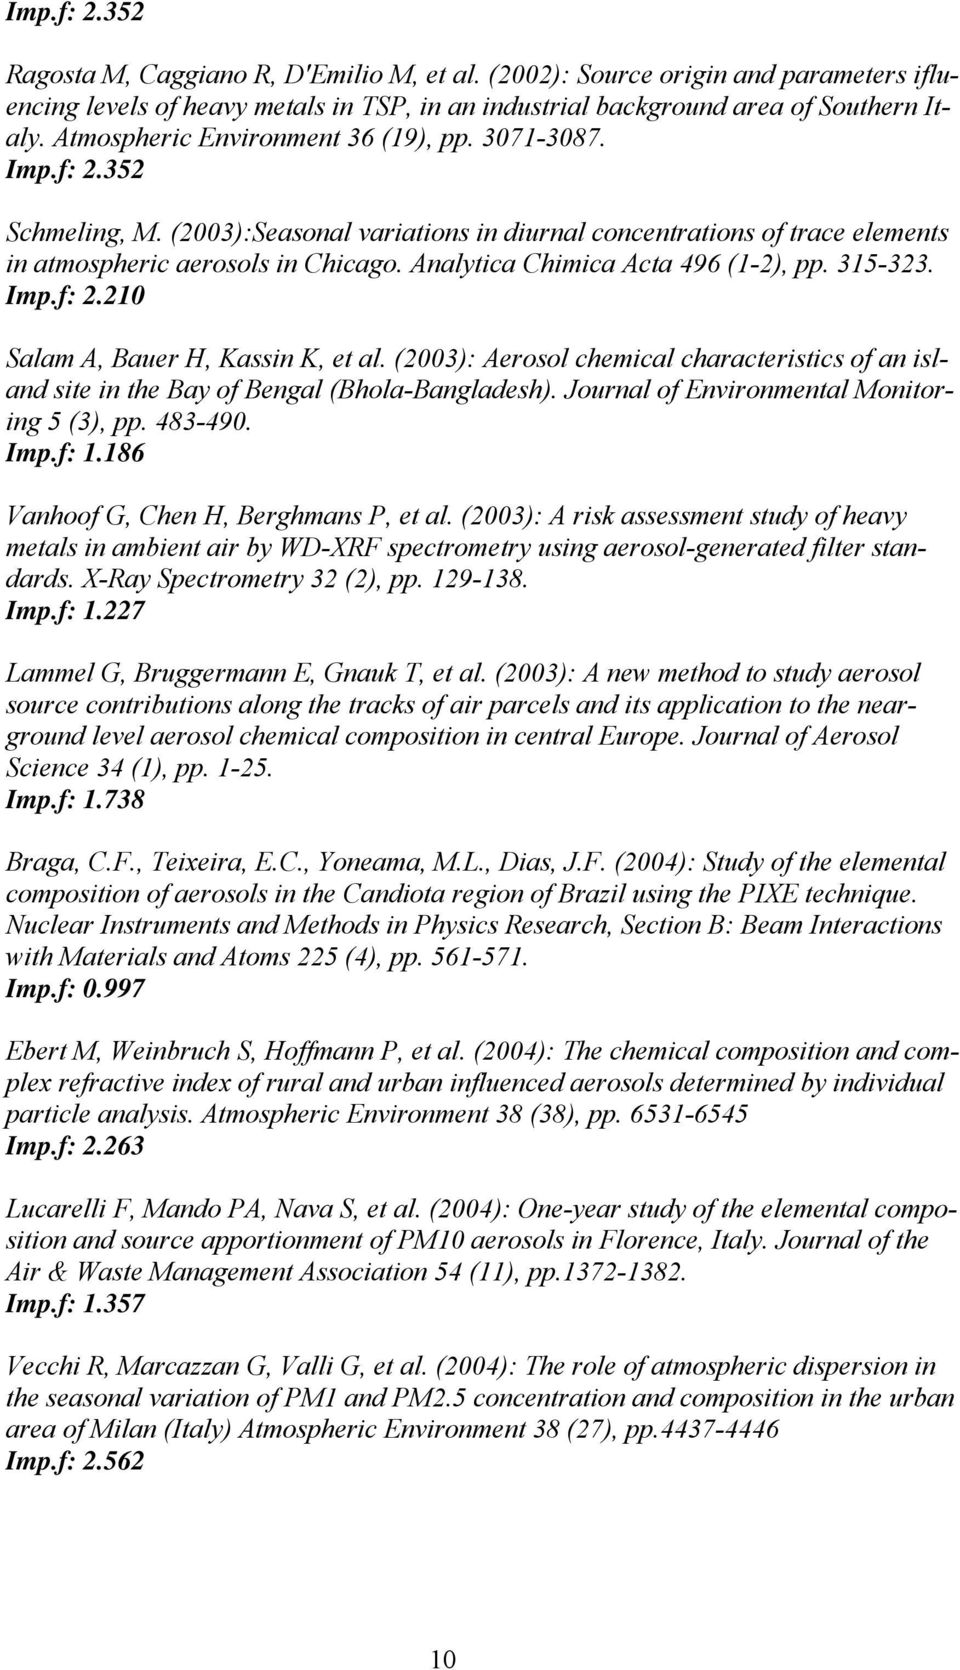 Analytica Chimica Acta 496 (1-2), pp. 315-323. Imp.f: 2.210 Salam A, Bauer H, Kassin K, et al. (2003): Aerosol chemical characteristics of an island site in the Bay of Bengal (Bhola-Bangladesh).